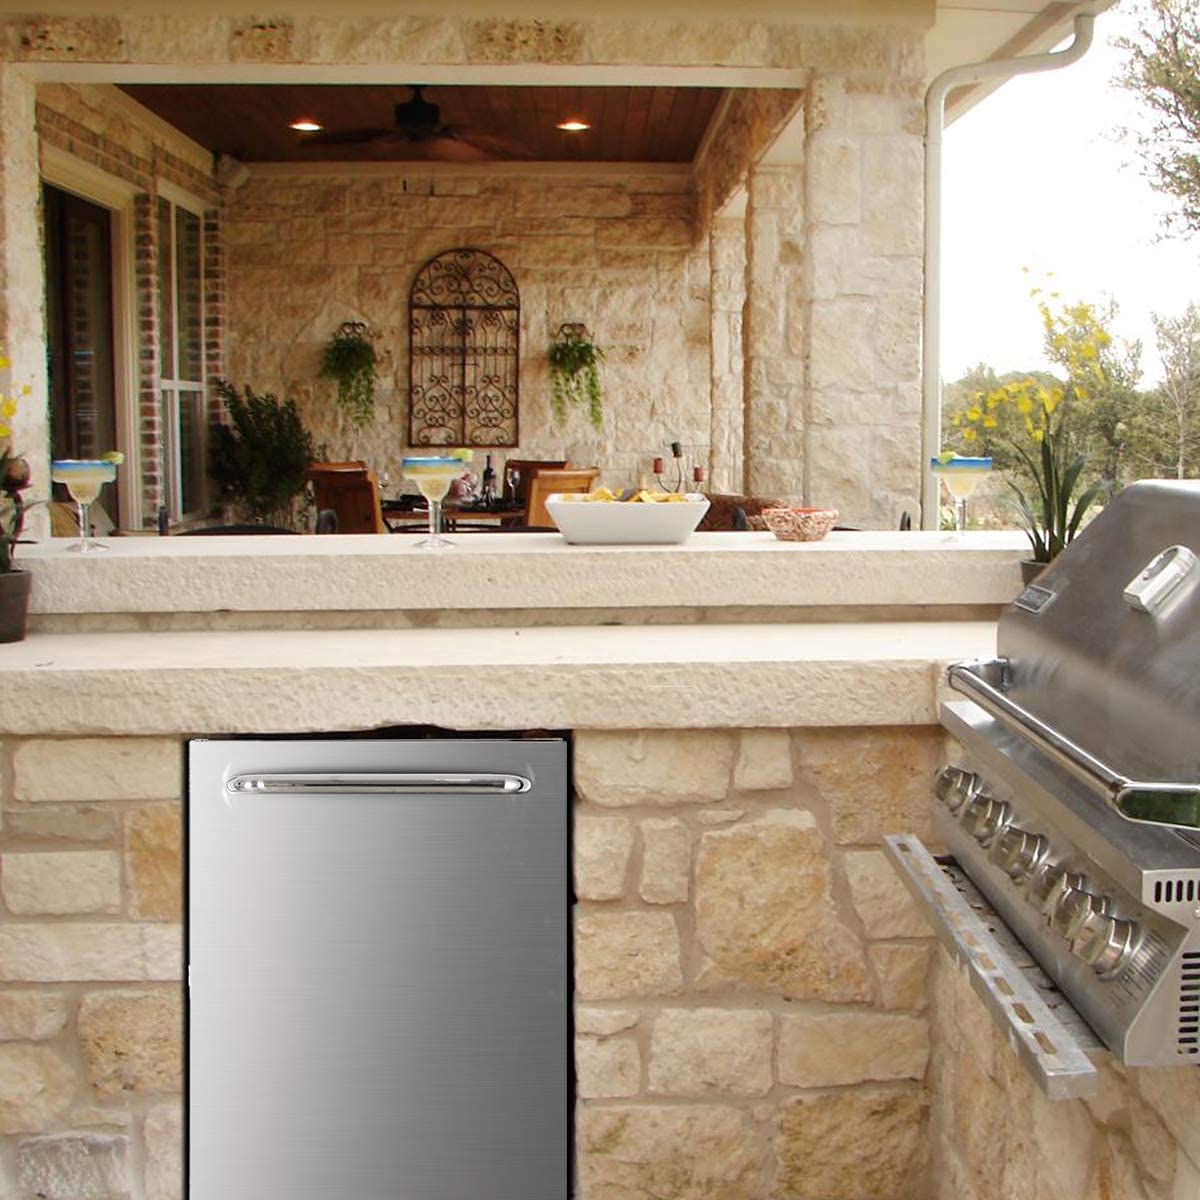 Can Outdoor Refrigerators Run During Extremely Weather?